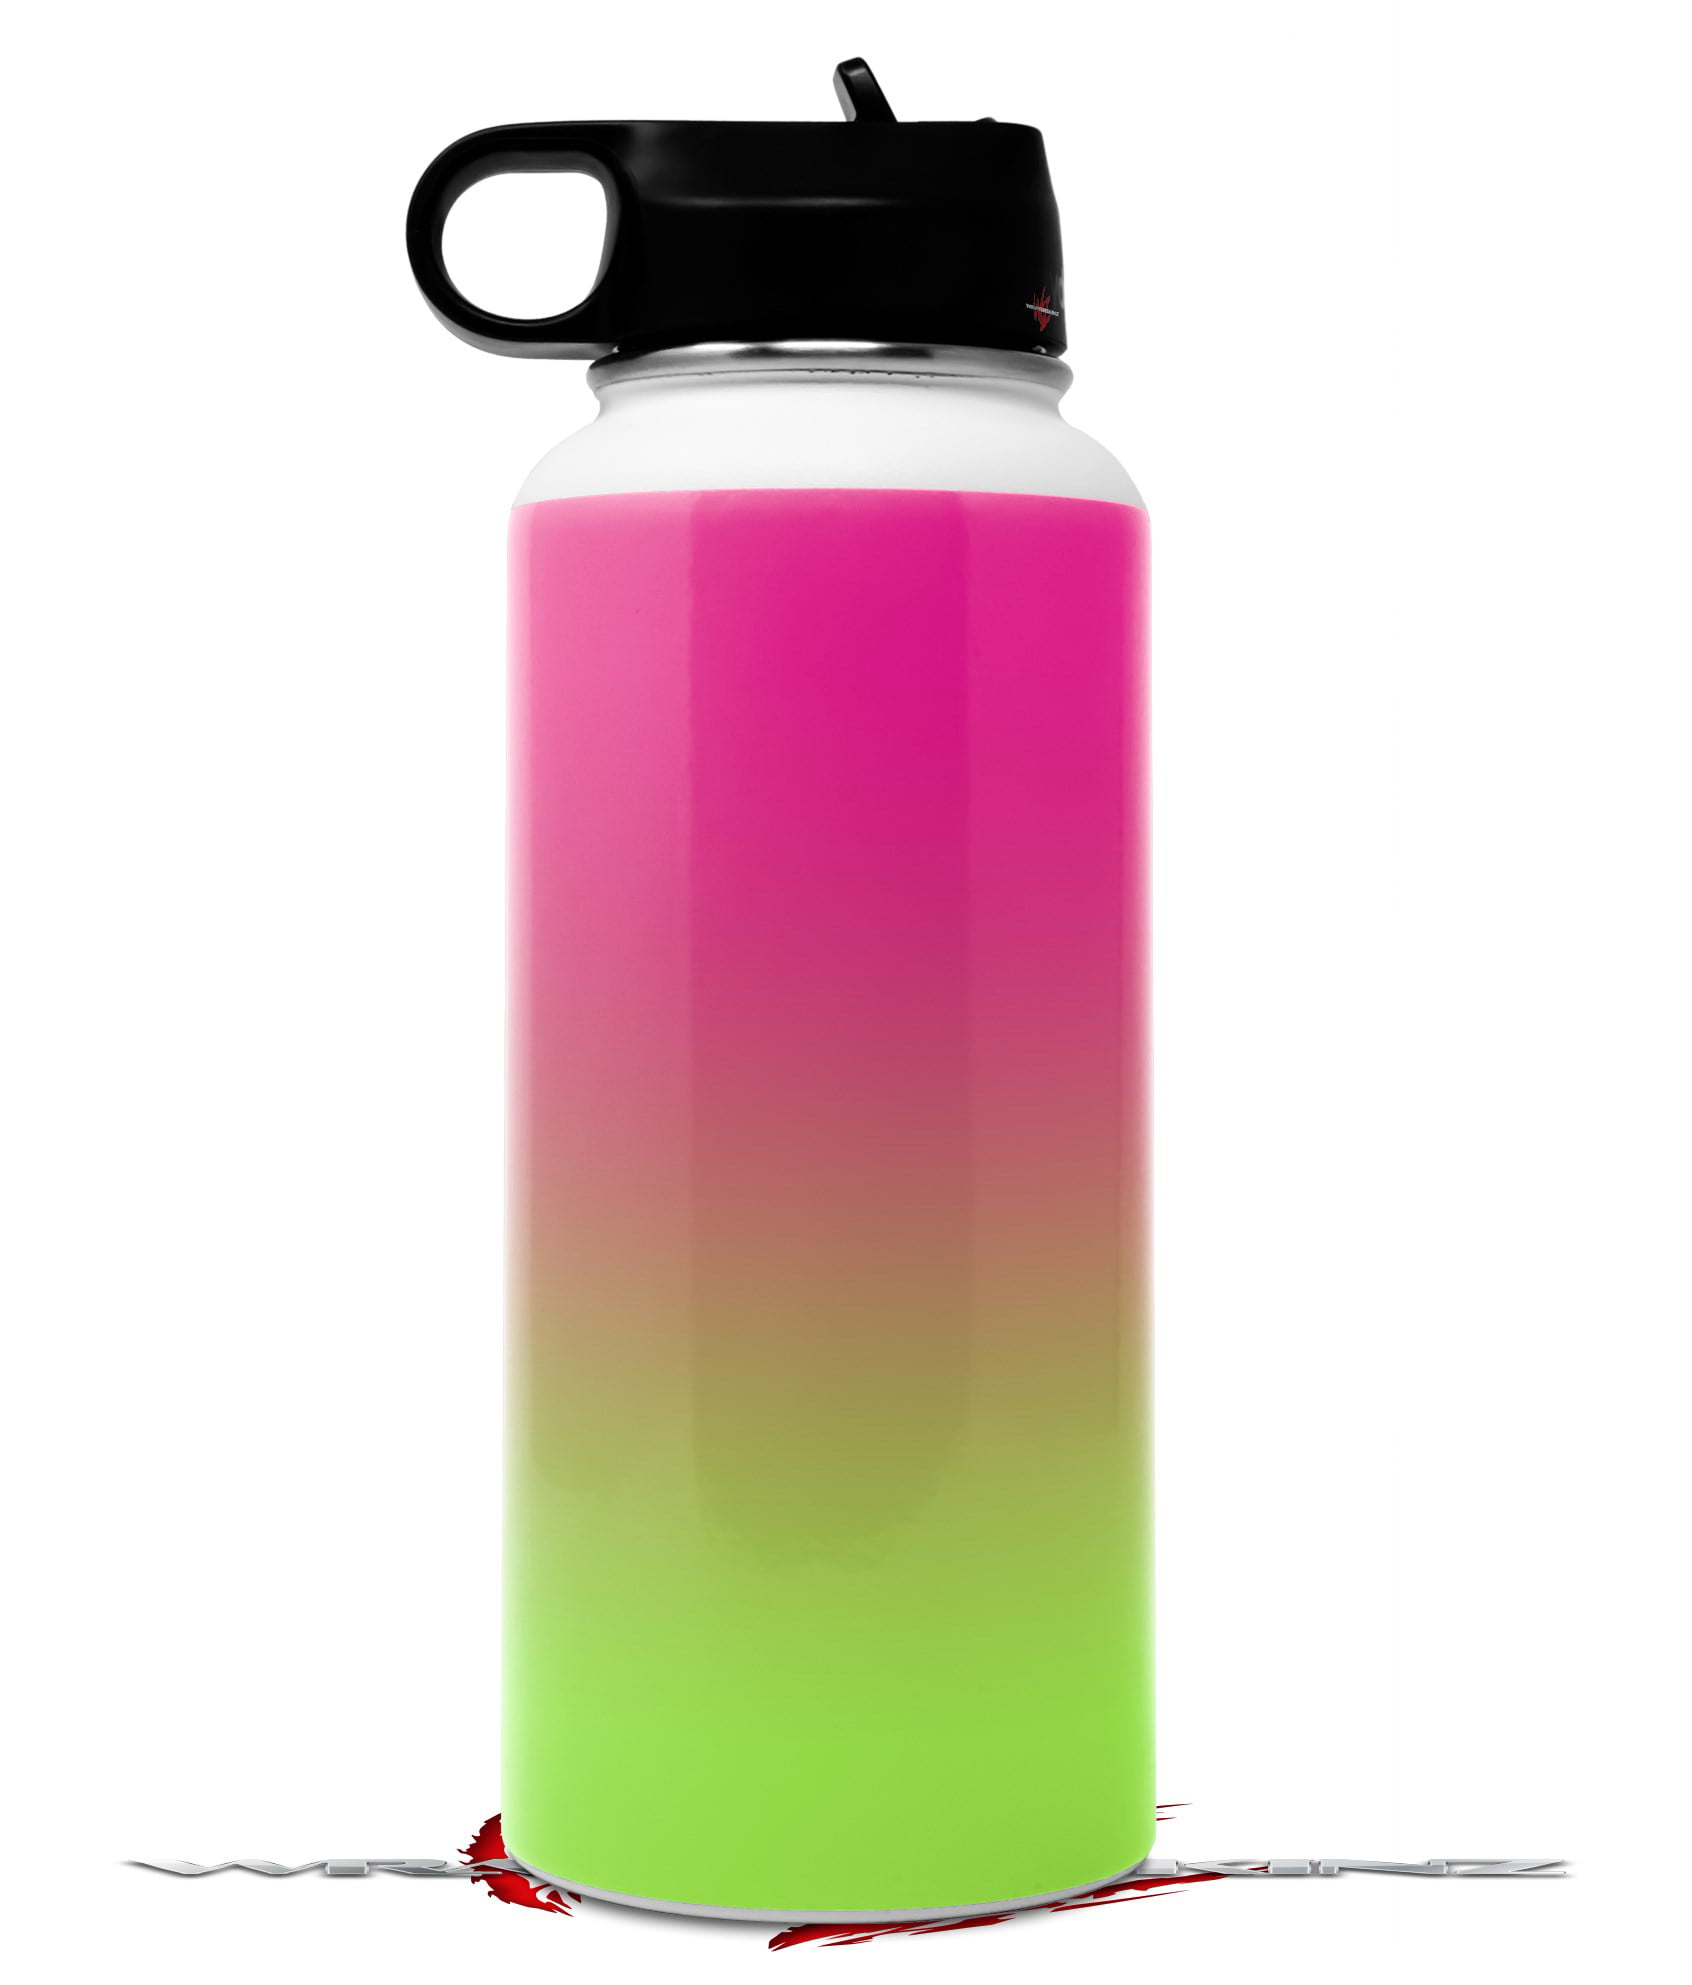 hydro flask neon pink